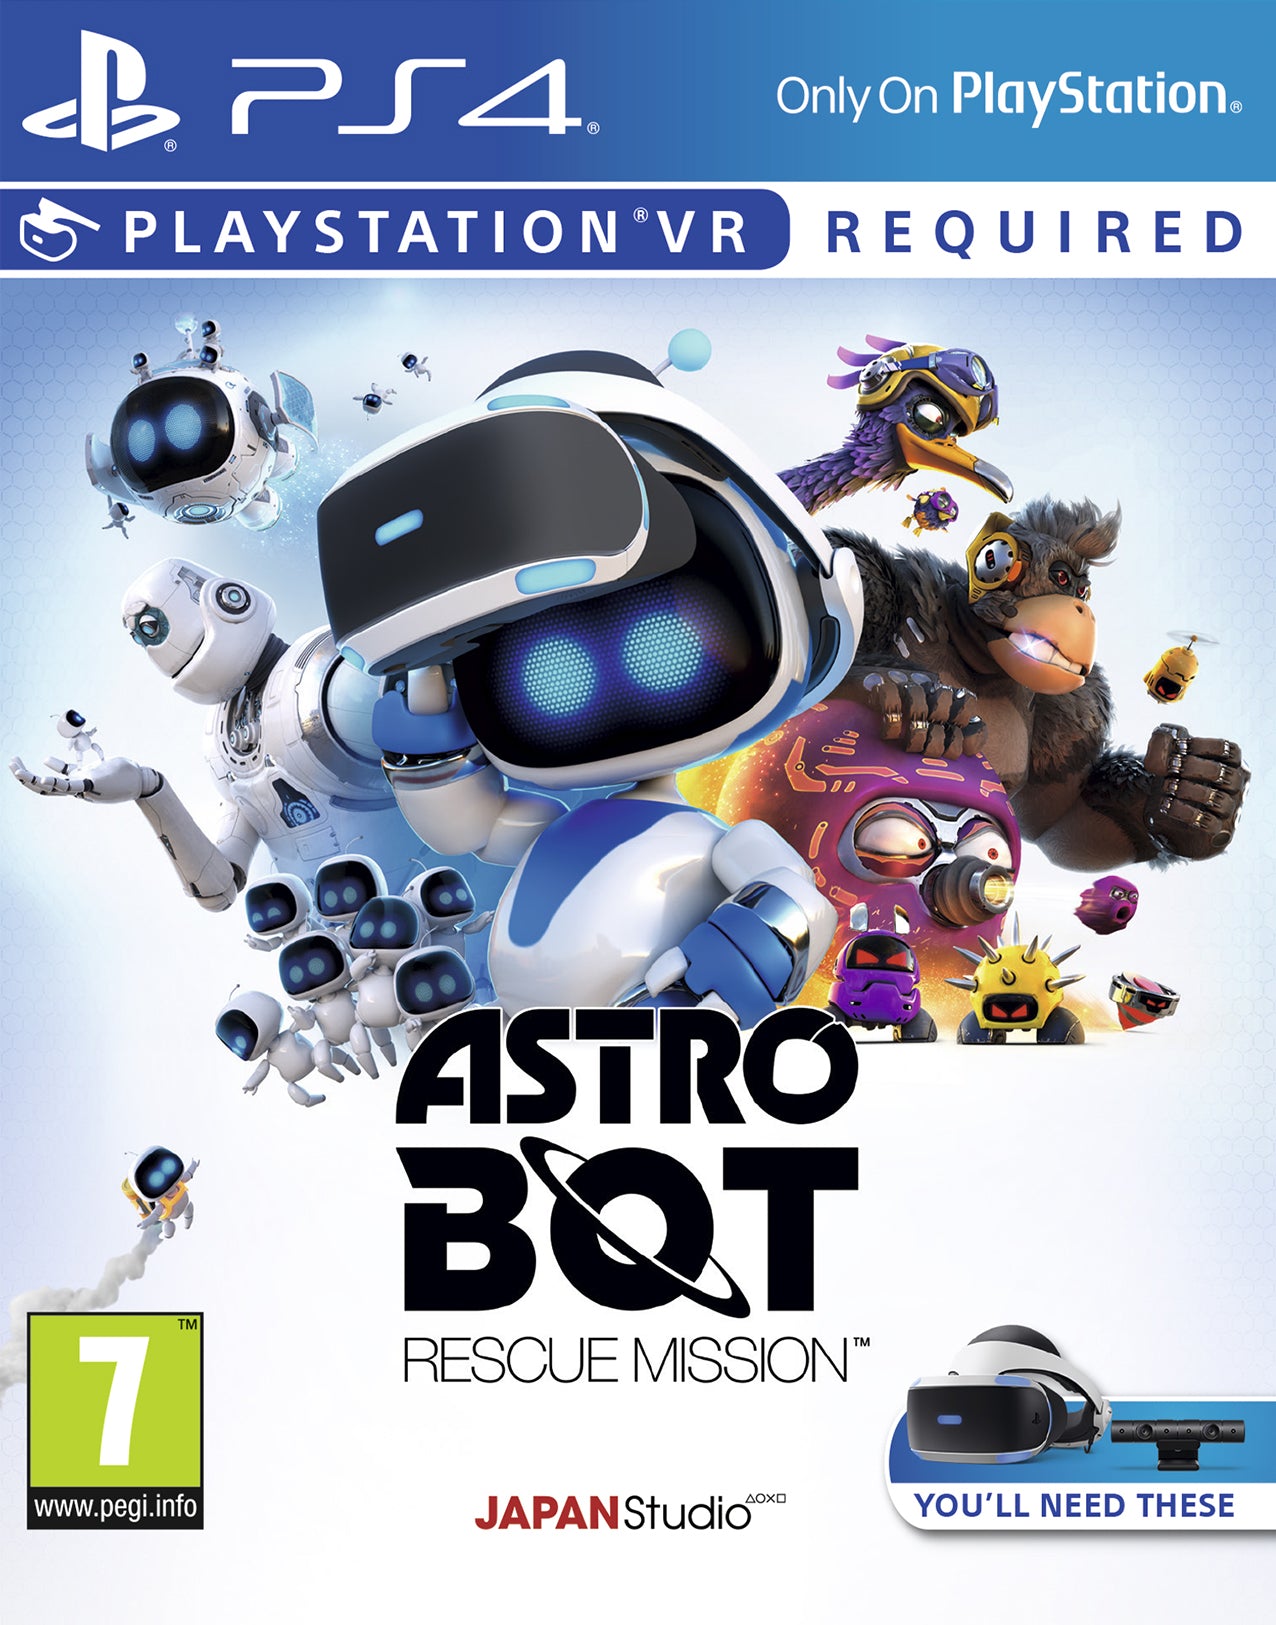 Buy Online Latest Premium Quality ASTRO BOT RESCUE MISSION - Playstation 4 - Buy Tech Today